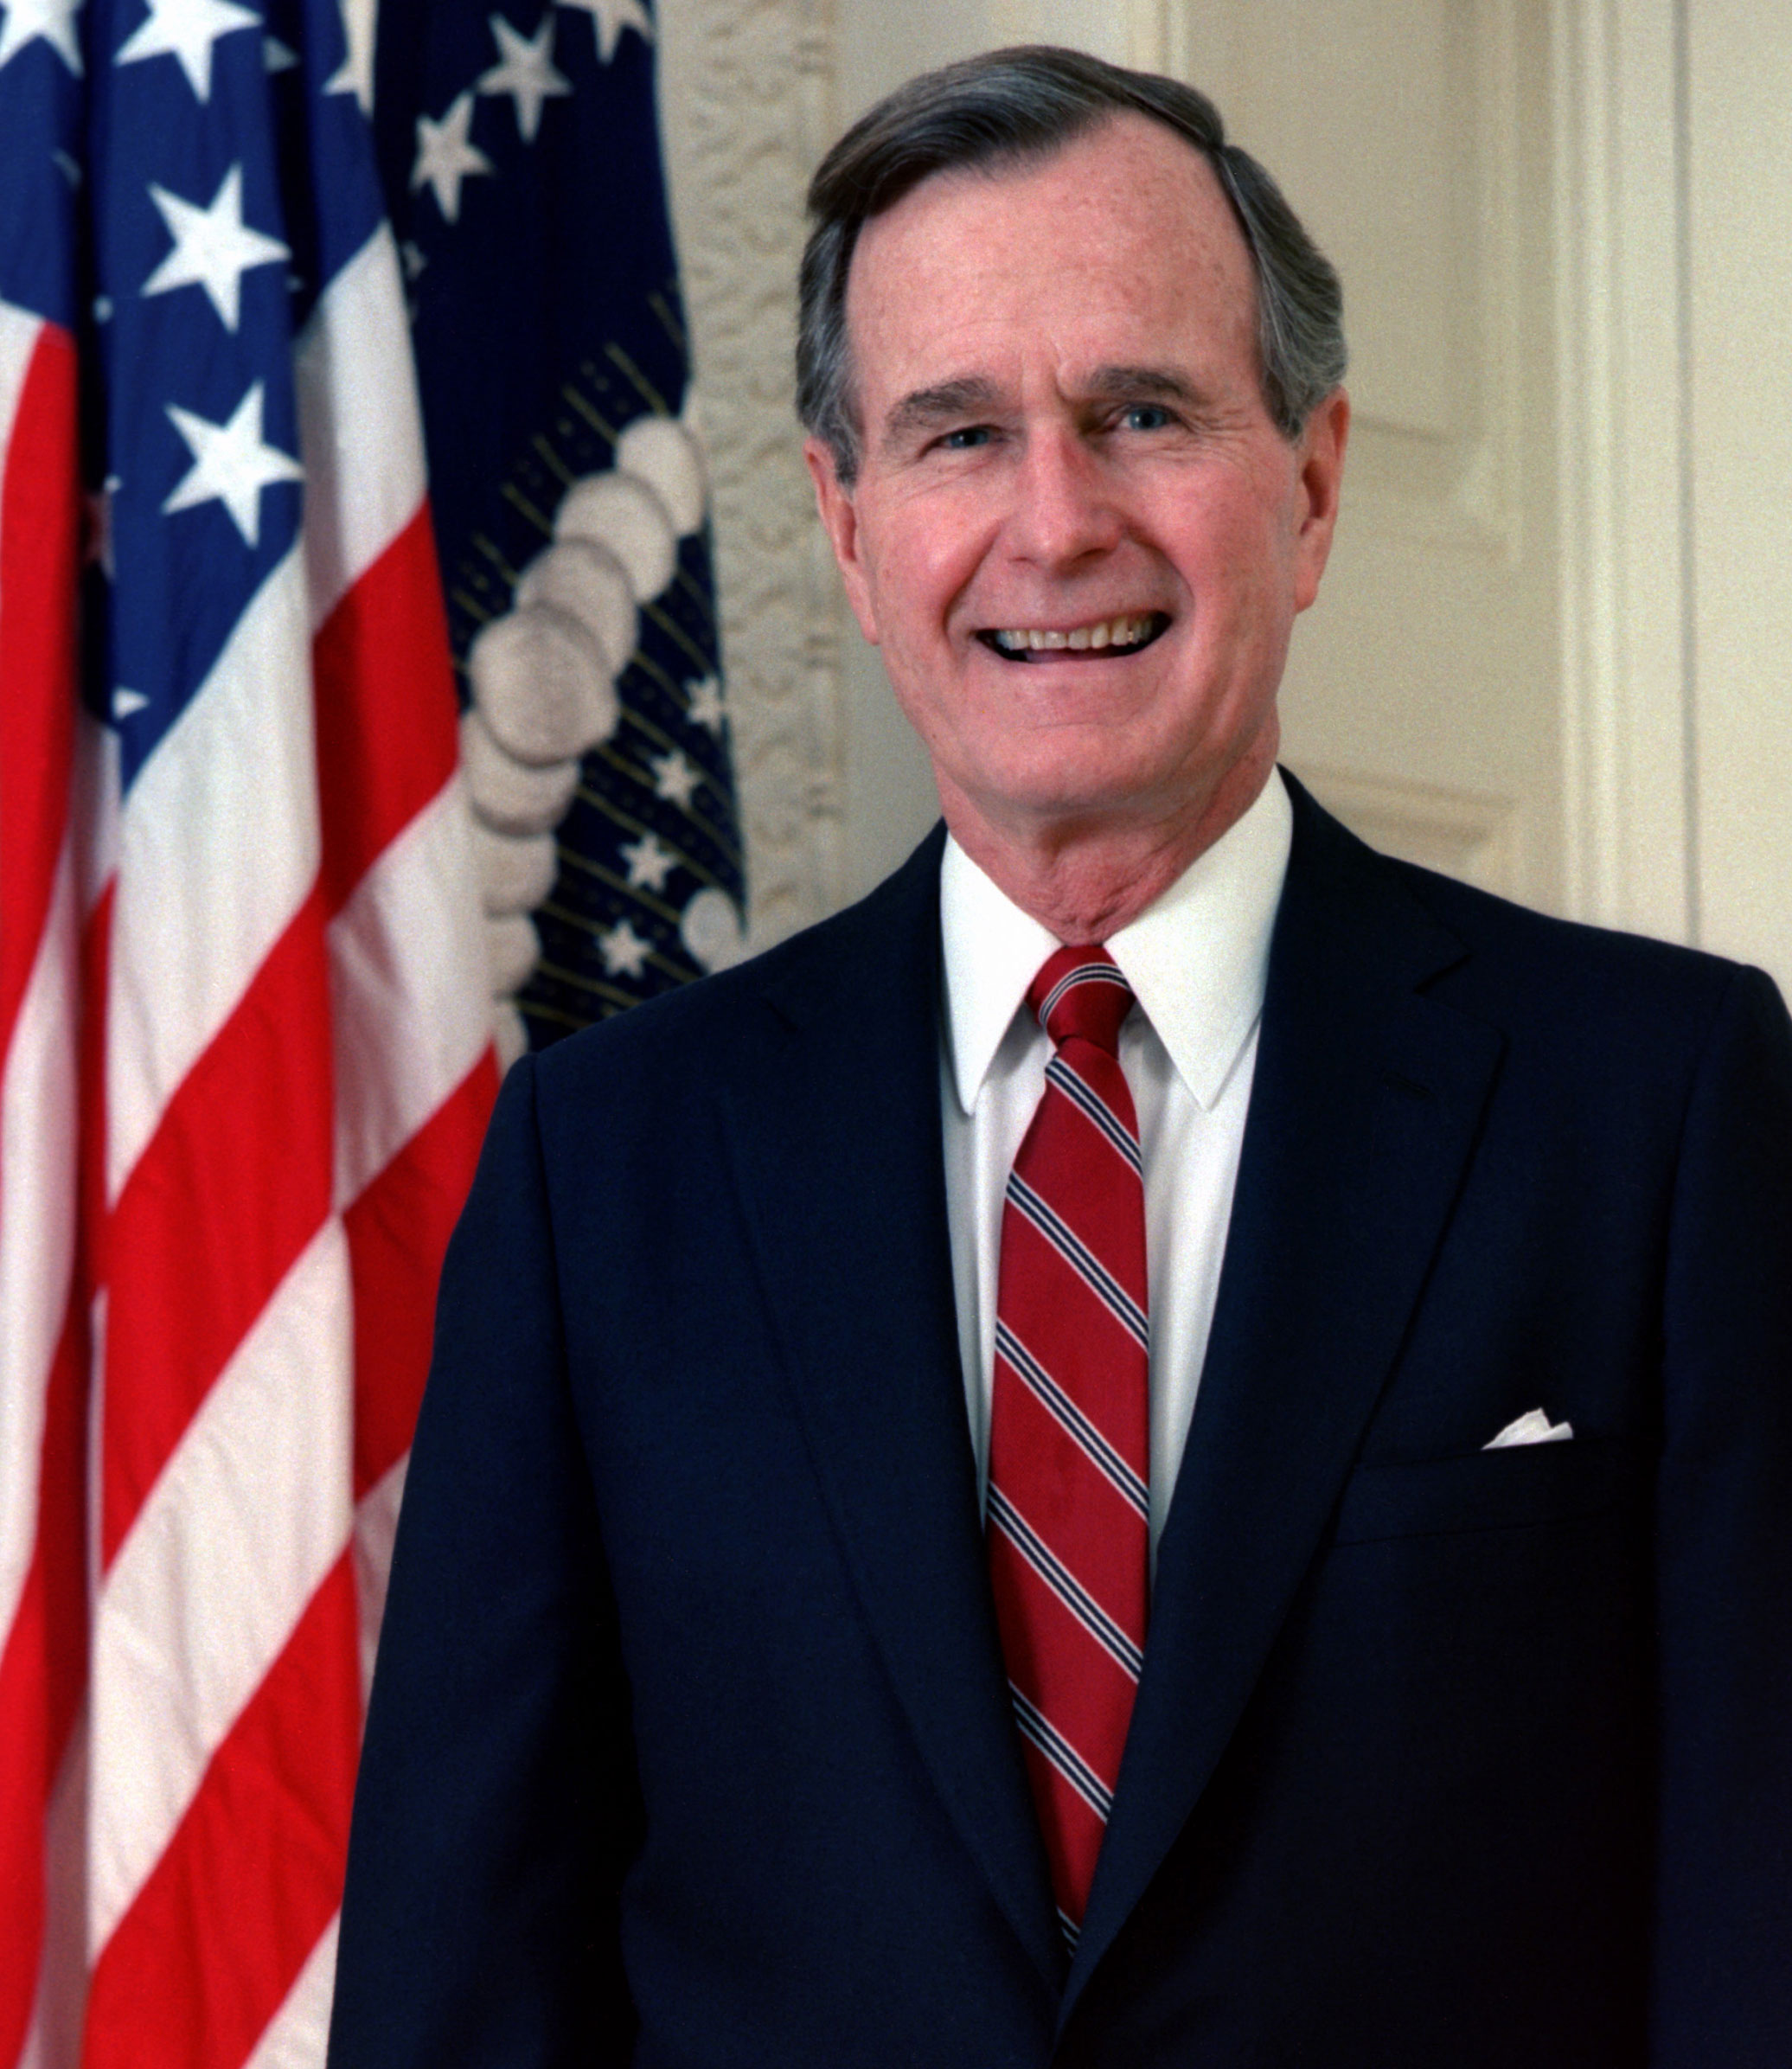 george_h-_w-_bush_president_of_the_united_states_1989_official_portrait